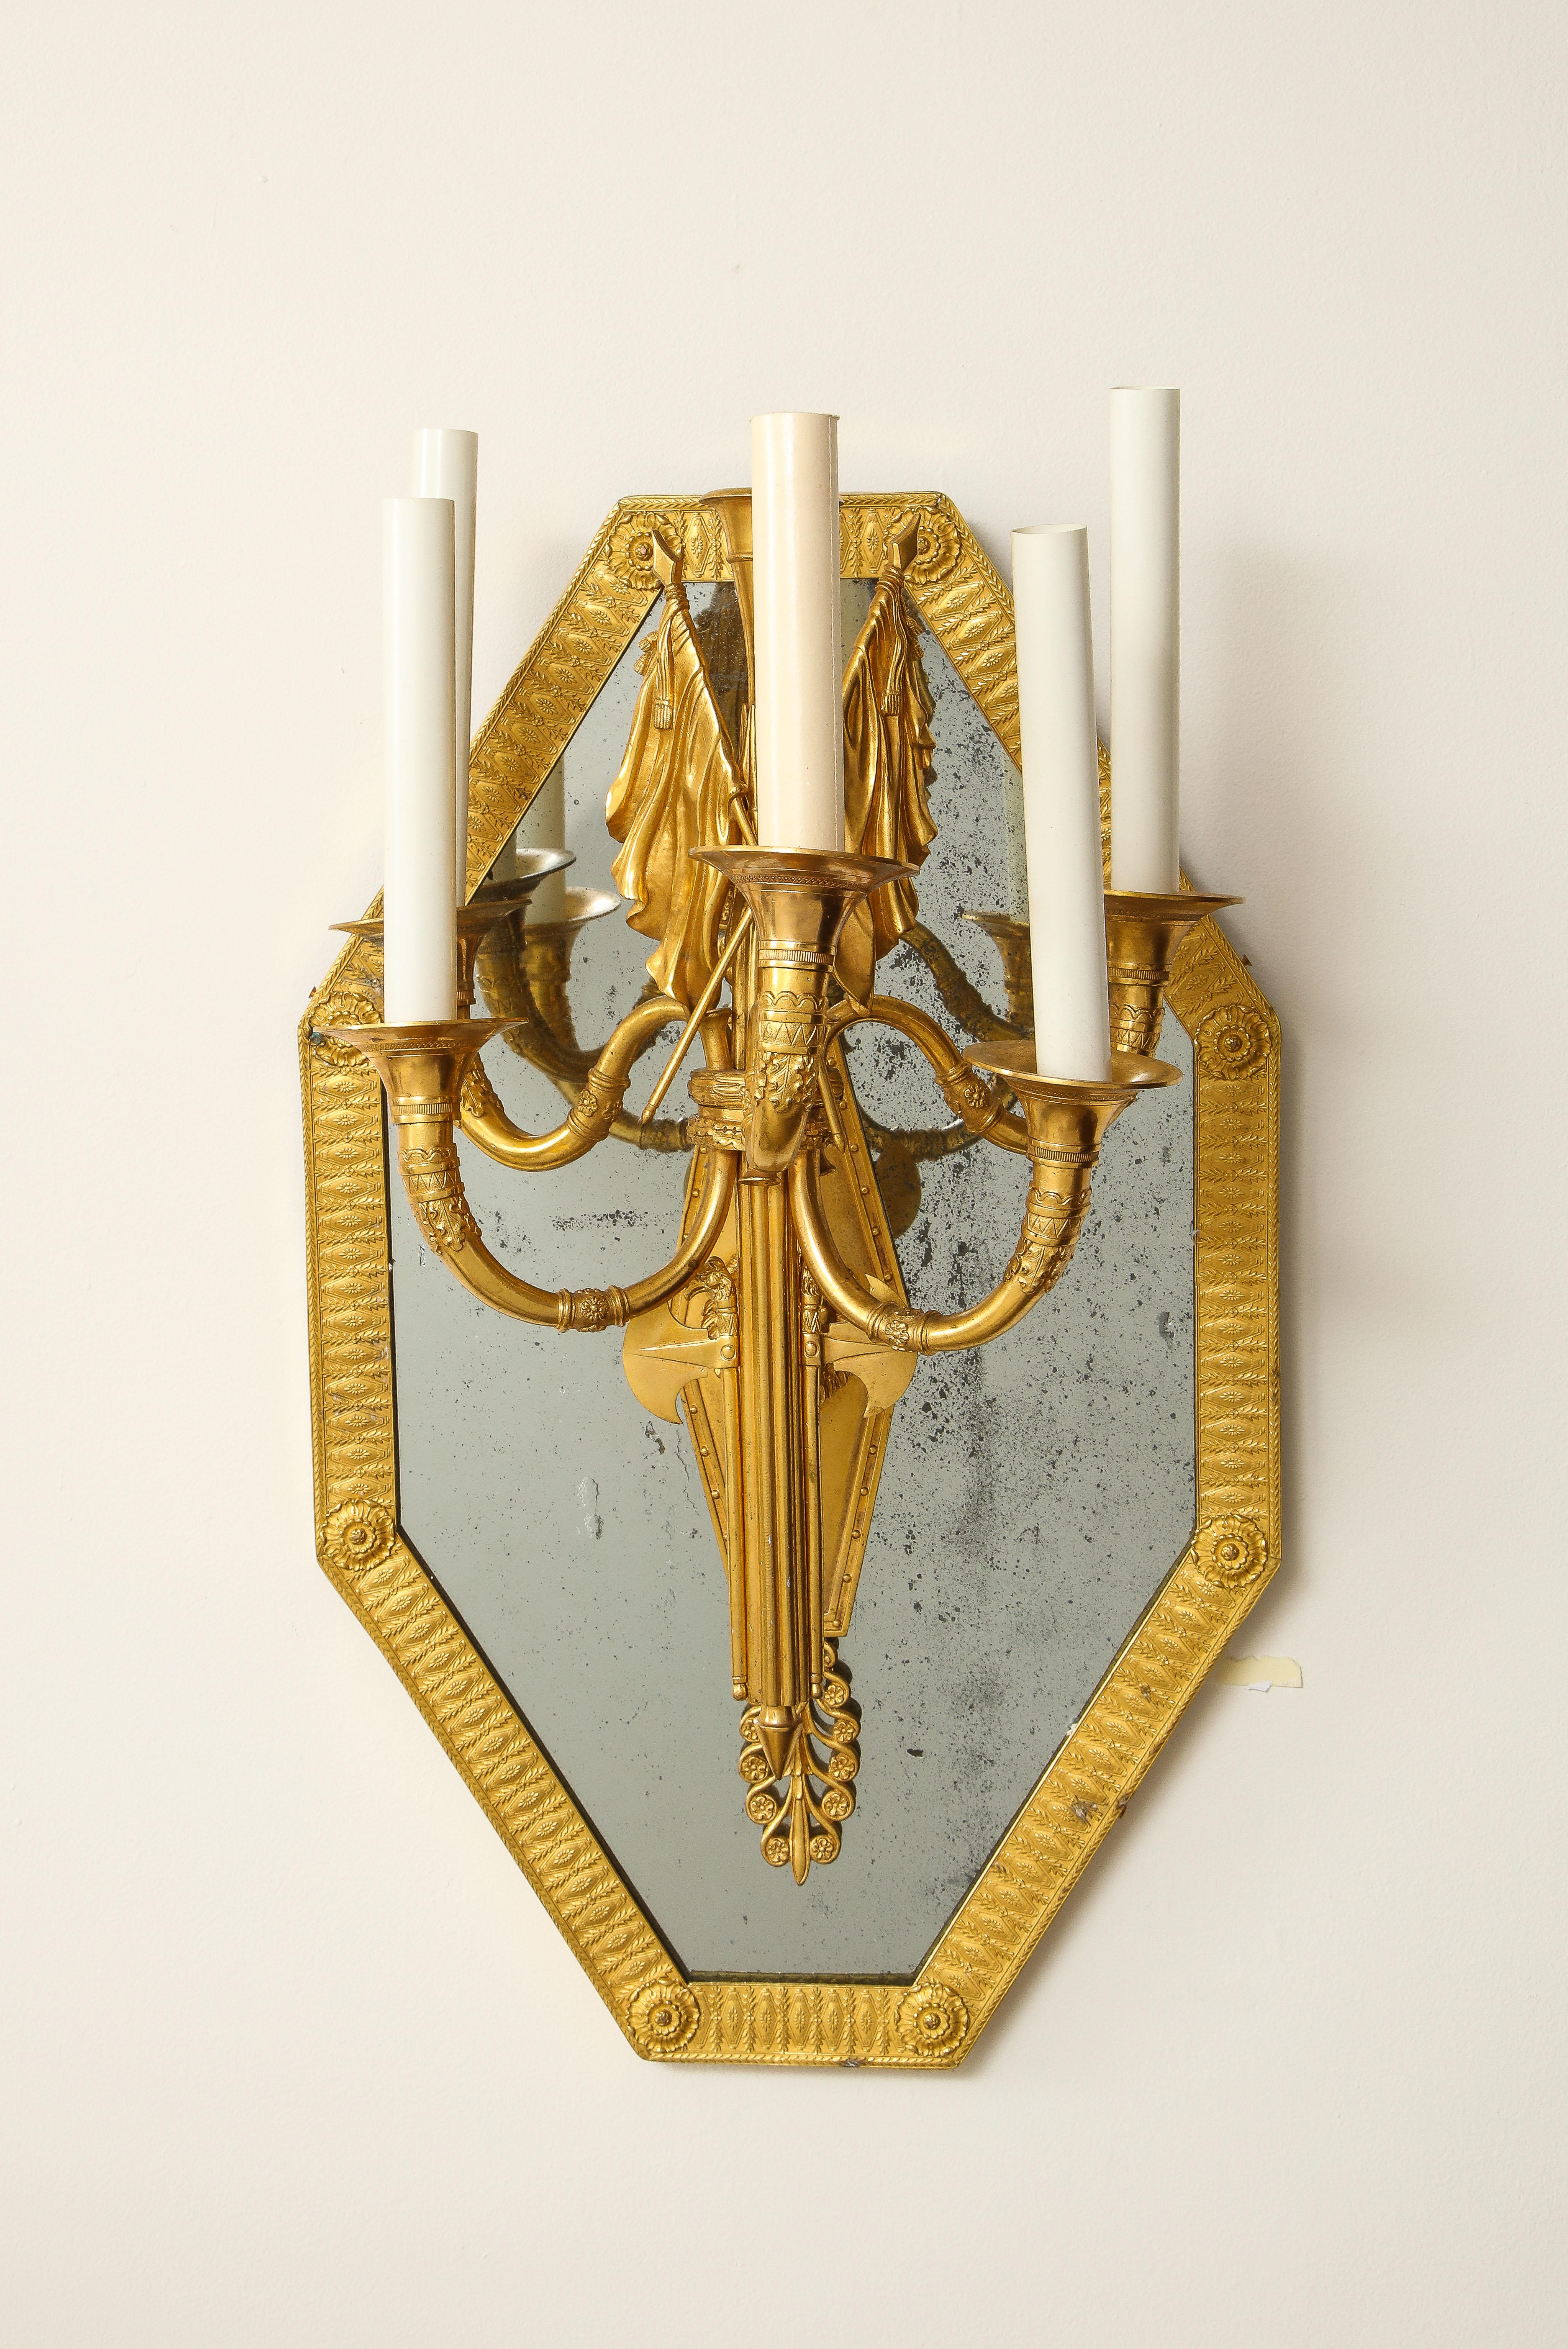 Pair of French 1st Empire Dore Bronze Mtd. 5-Arm Mirrored Sconces, Att. Thomire In Good Condition For Sale In New York, NY